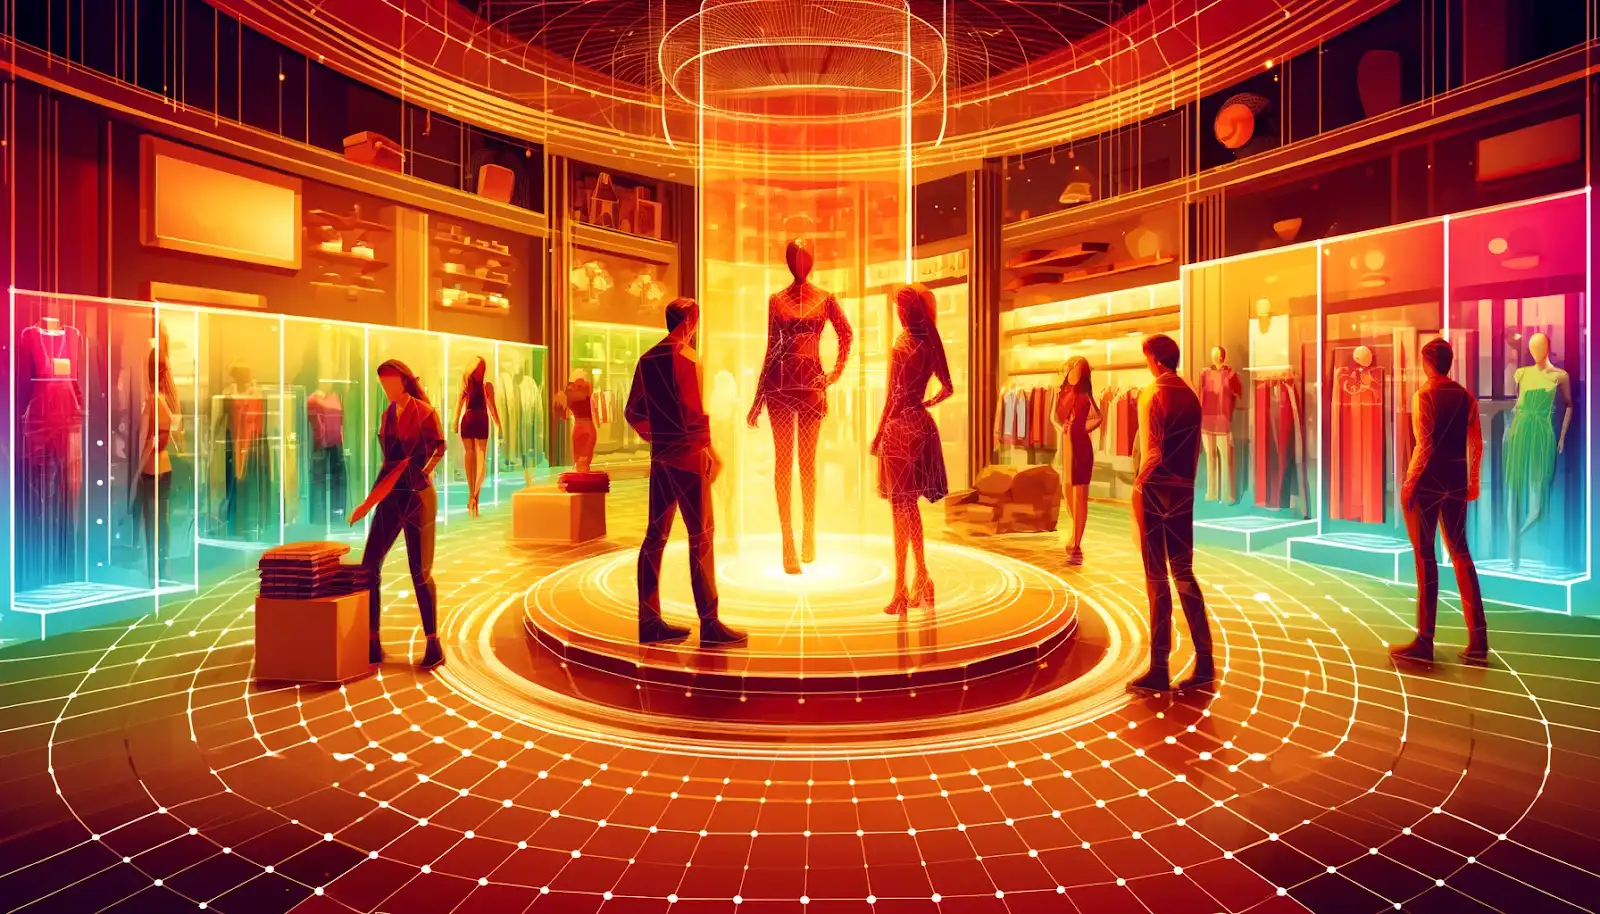 Shoppers in a virtual store with holographic displays, virtual mirrors, and stylish clothing racks. 